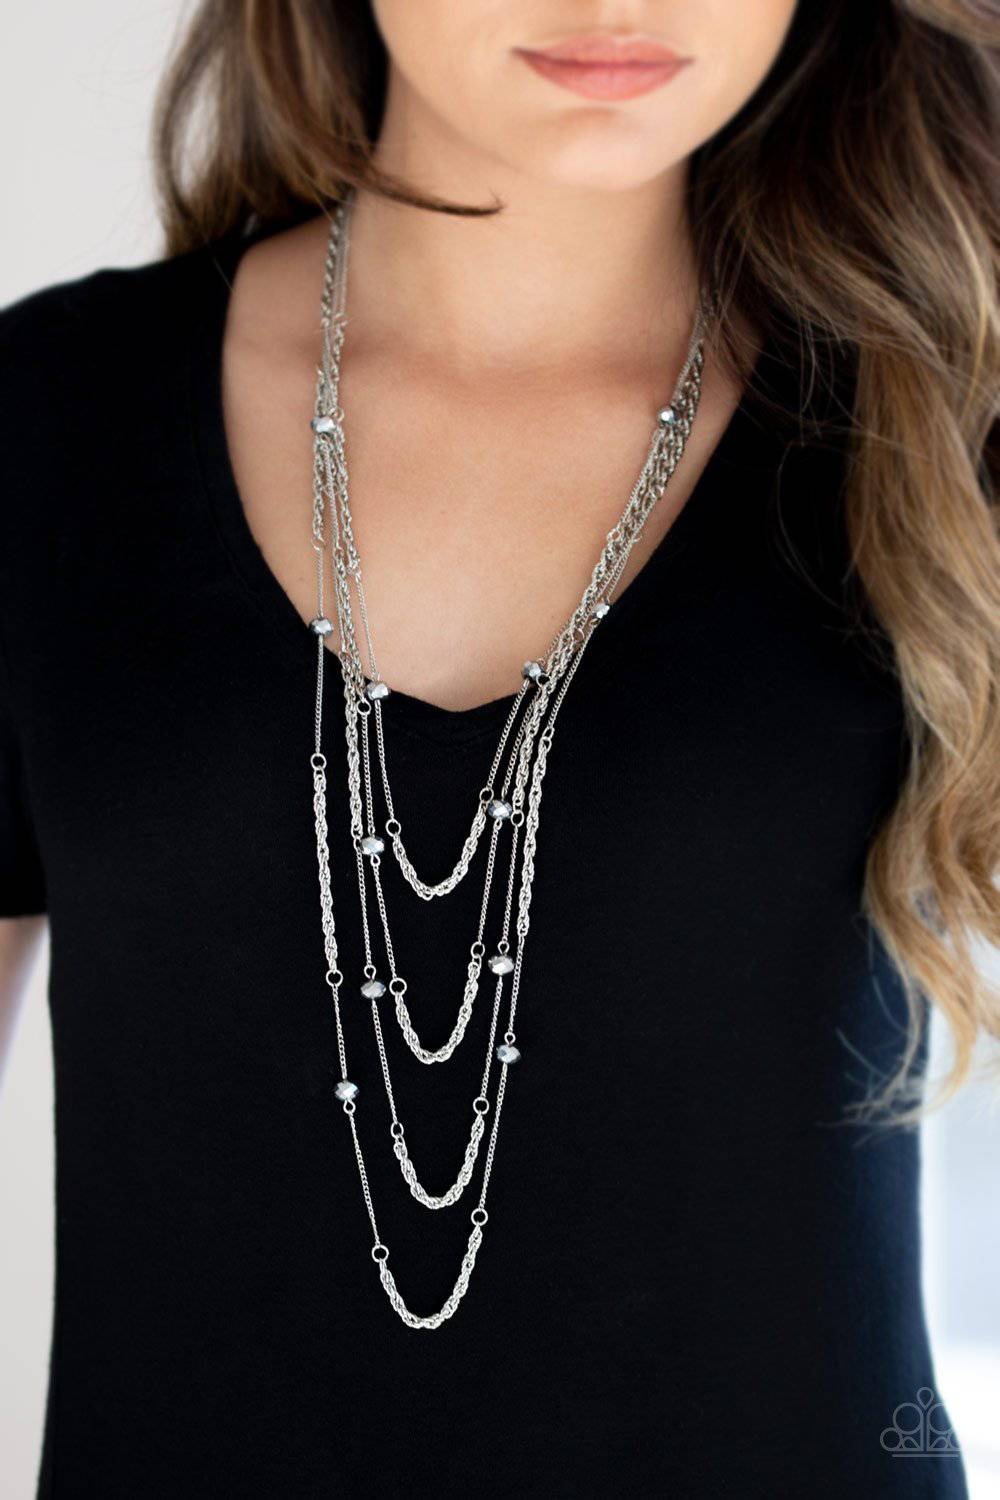 Open For Opulence - Silver Crystal-Like Bead Necklace - Paparazzi Accessories - GlaMarous Titi Jewels